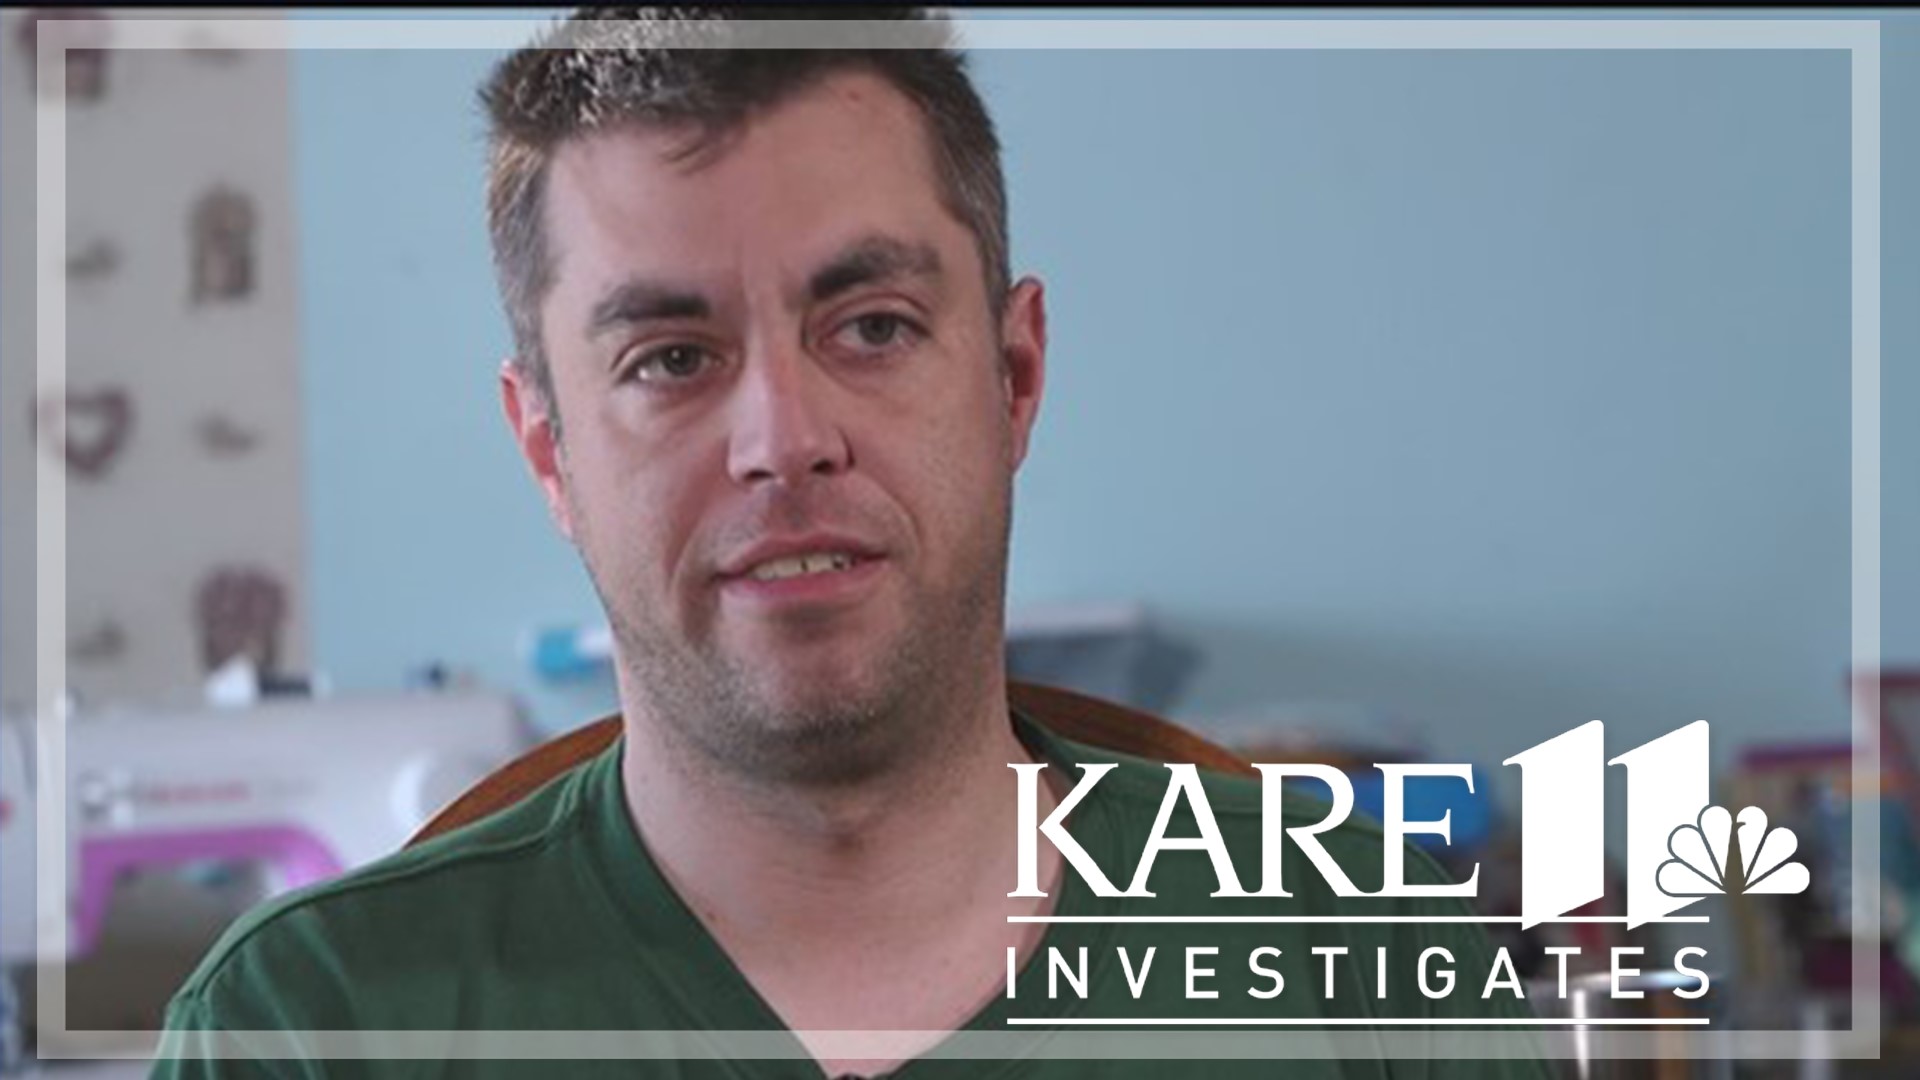 A KARE 11 investigation exposes Veterans misdiagnosed by the same doctor while the VA turned a blind eye and denied benefits.